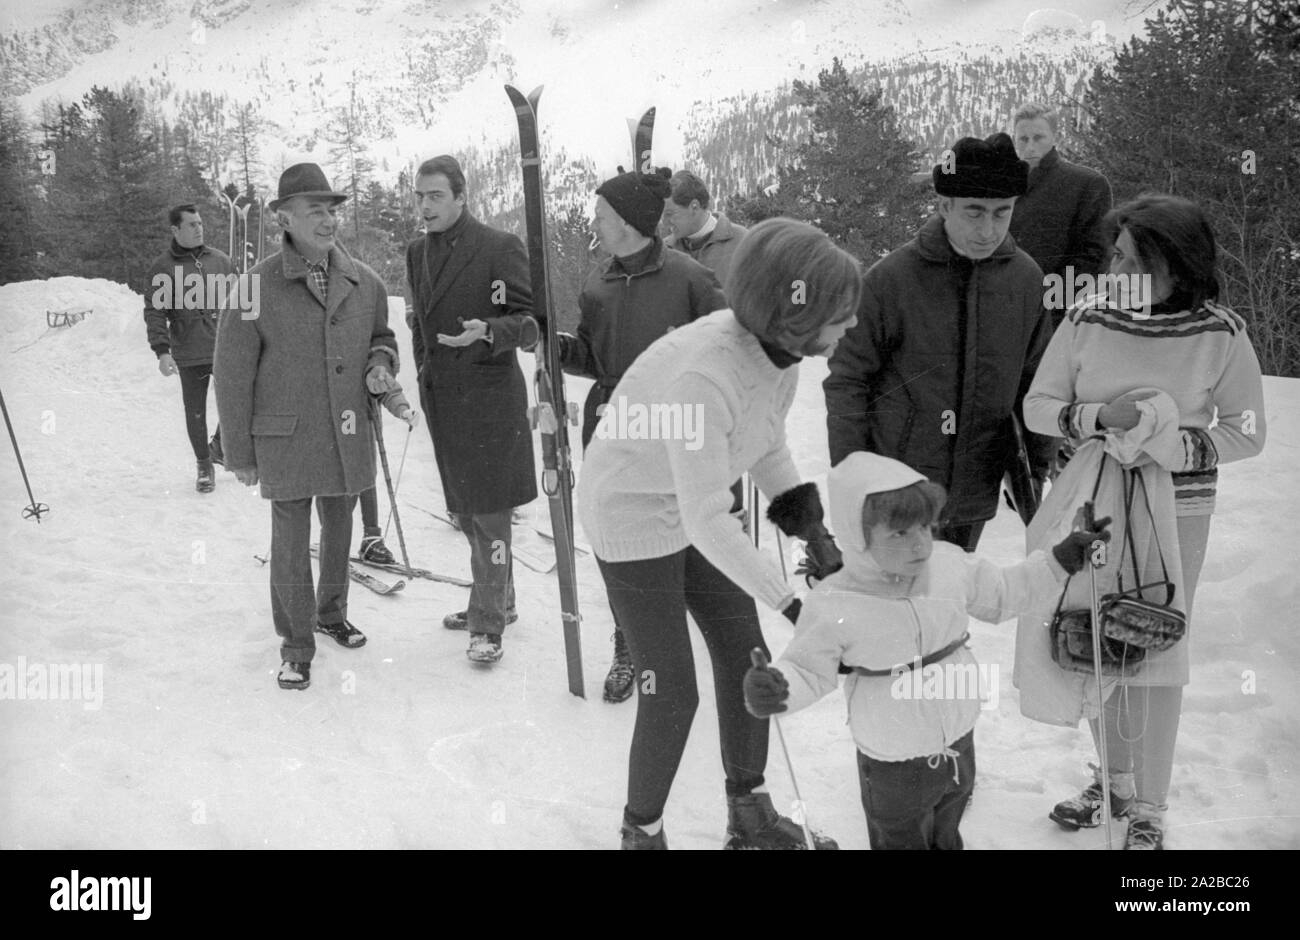 Farah Diba (2nd from the right), wife of the Iranian Shah Mohammad Reza Pahlavi, with her daughter Farahnaz (1st from the right) skiing in St. Moritz in 1968. Stock Photo